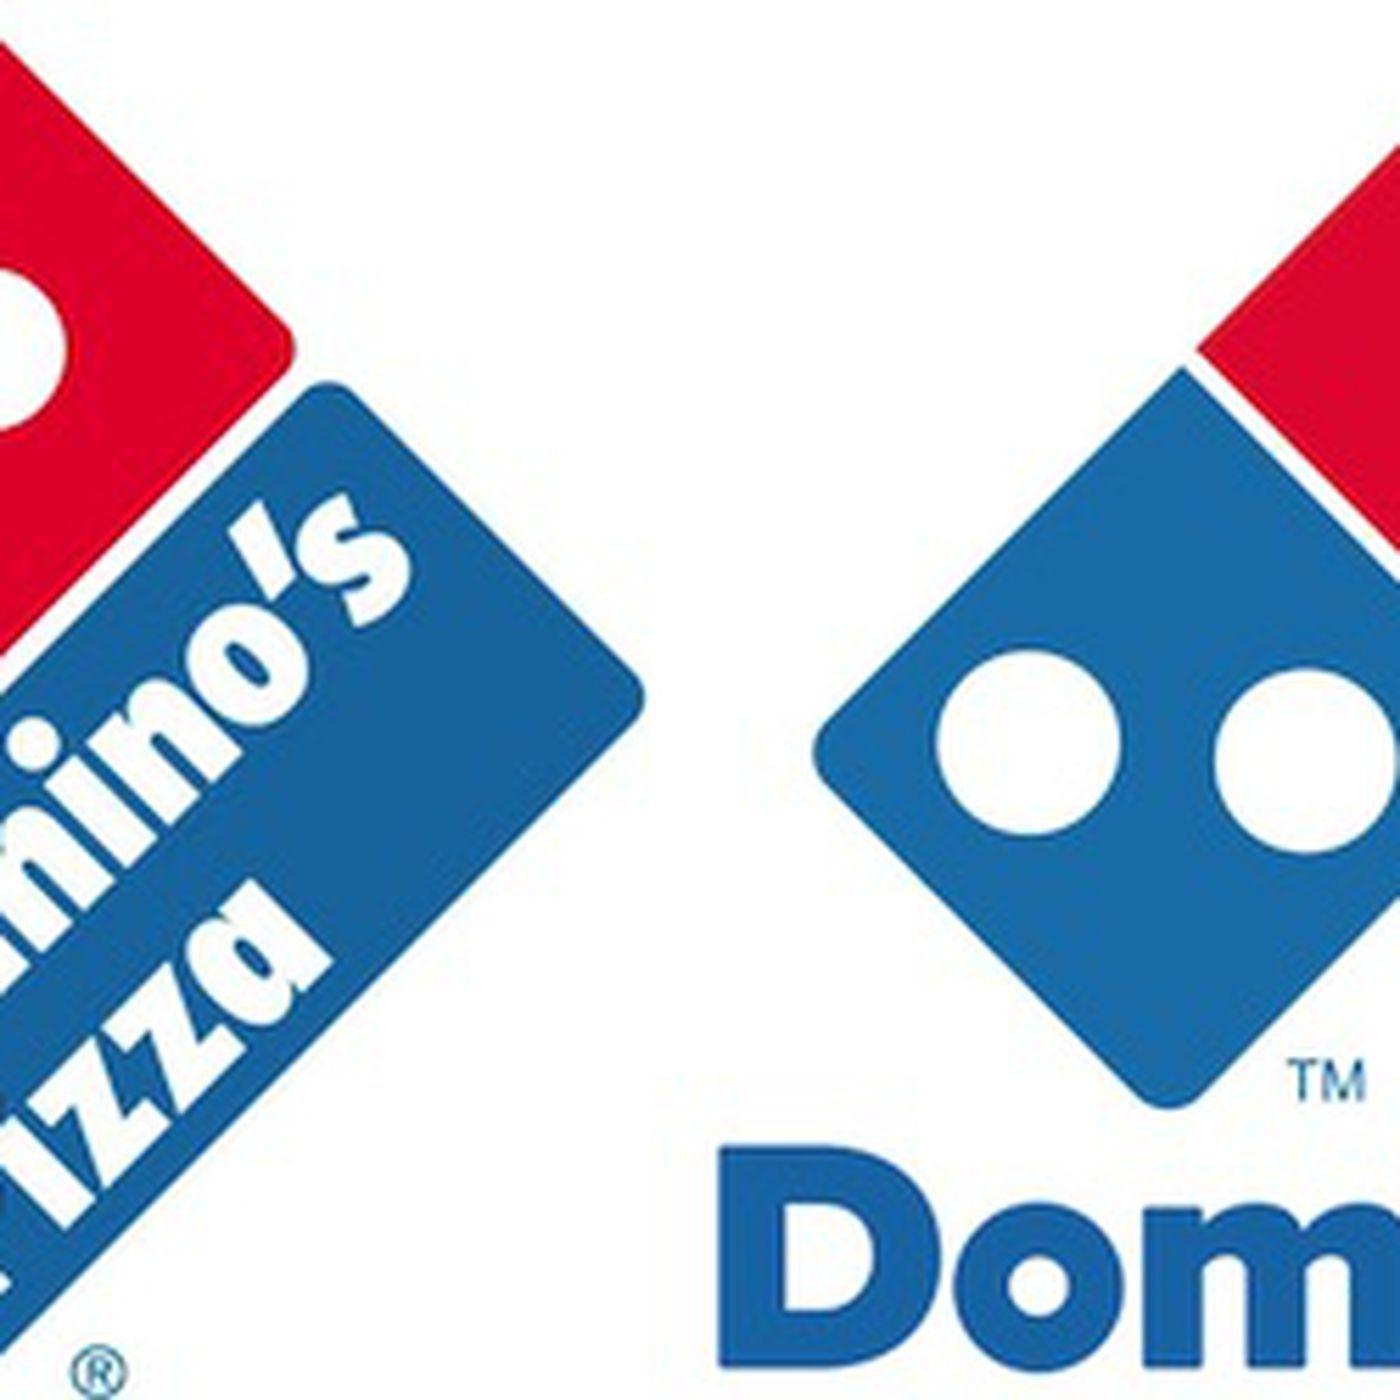 Domino's Old Logo - Domino's Removes 'Pizza' From Its New Logo - Eater